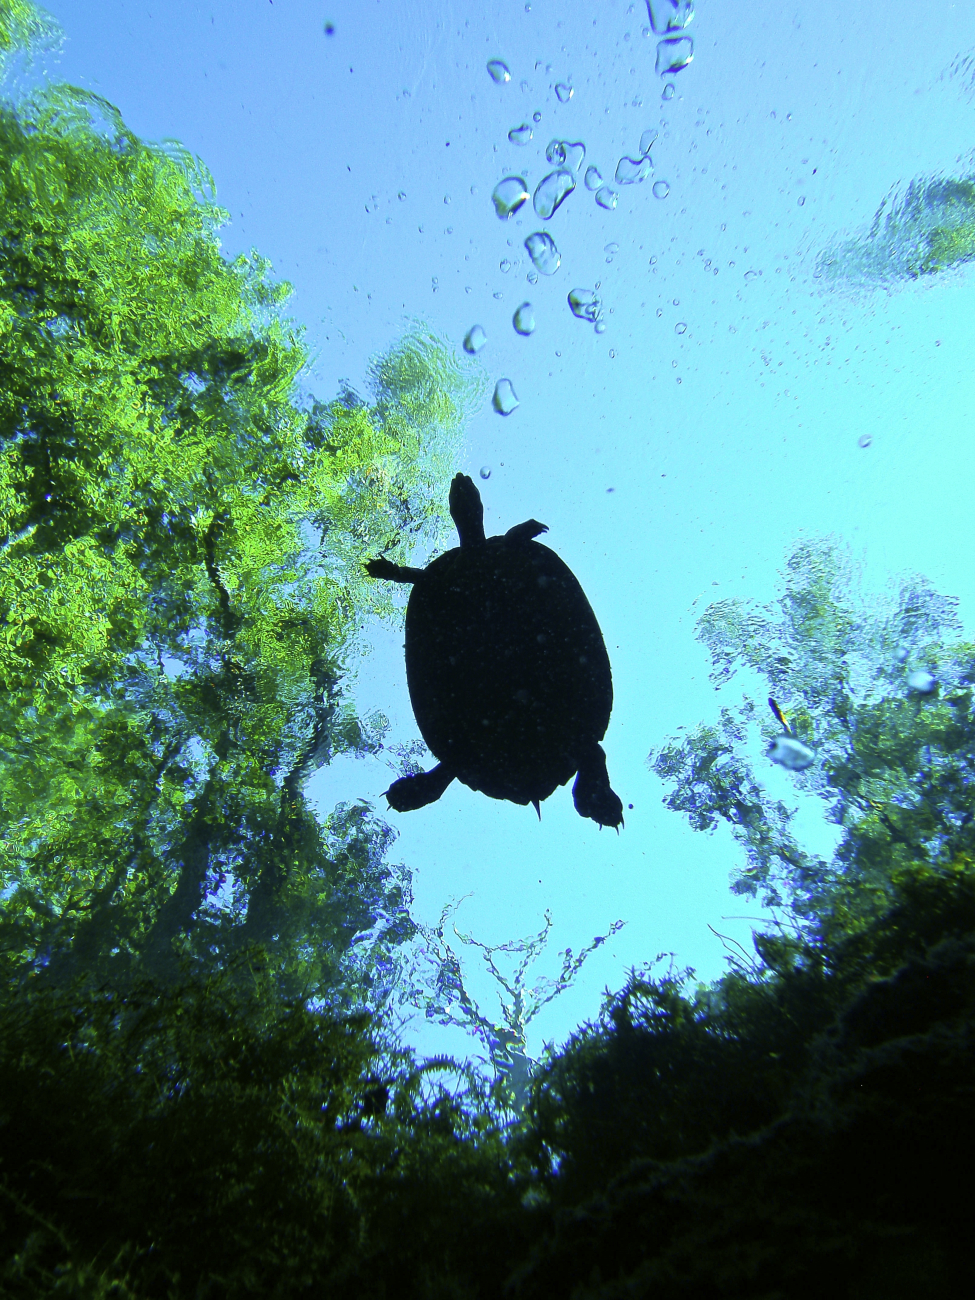 Turtles can fly - a turtle soars overhead of a small spring vent at GilchristBlue Spring